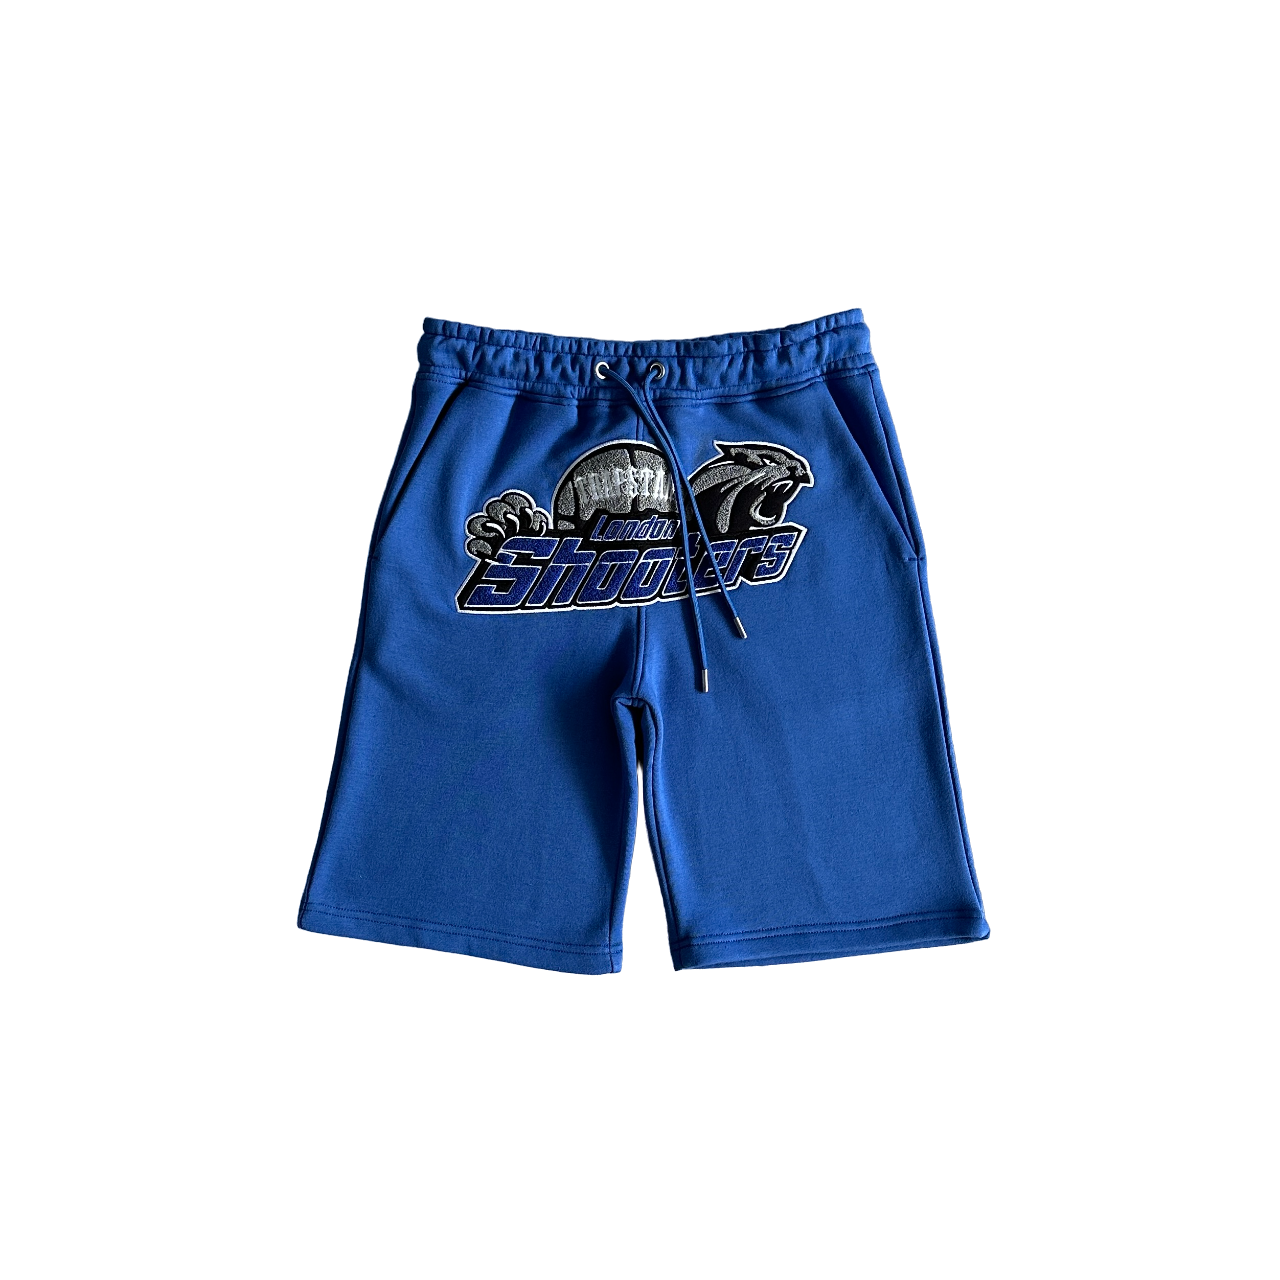 Trapstar Shooters Chenille Shorts - (BLUE/DAZZLING BLUE)